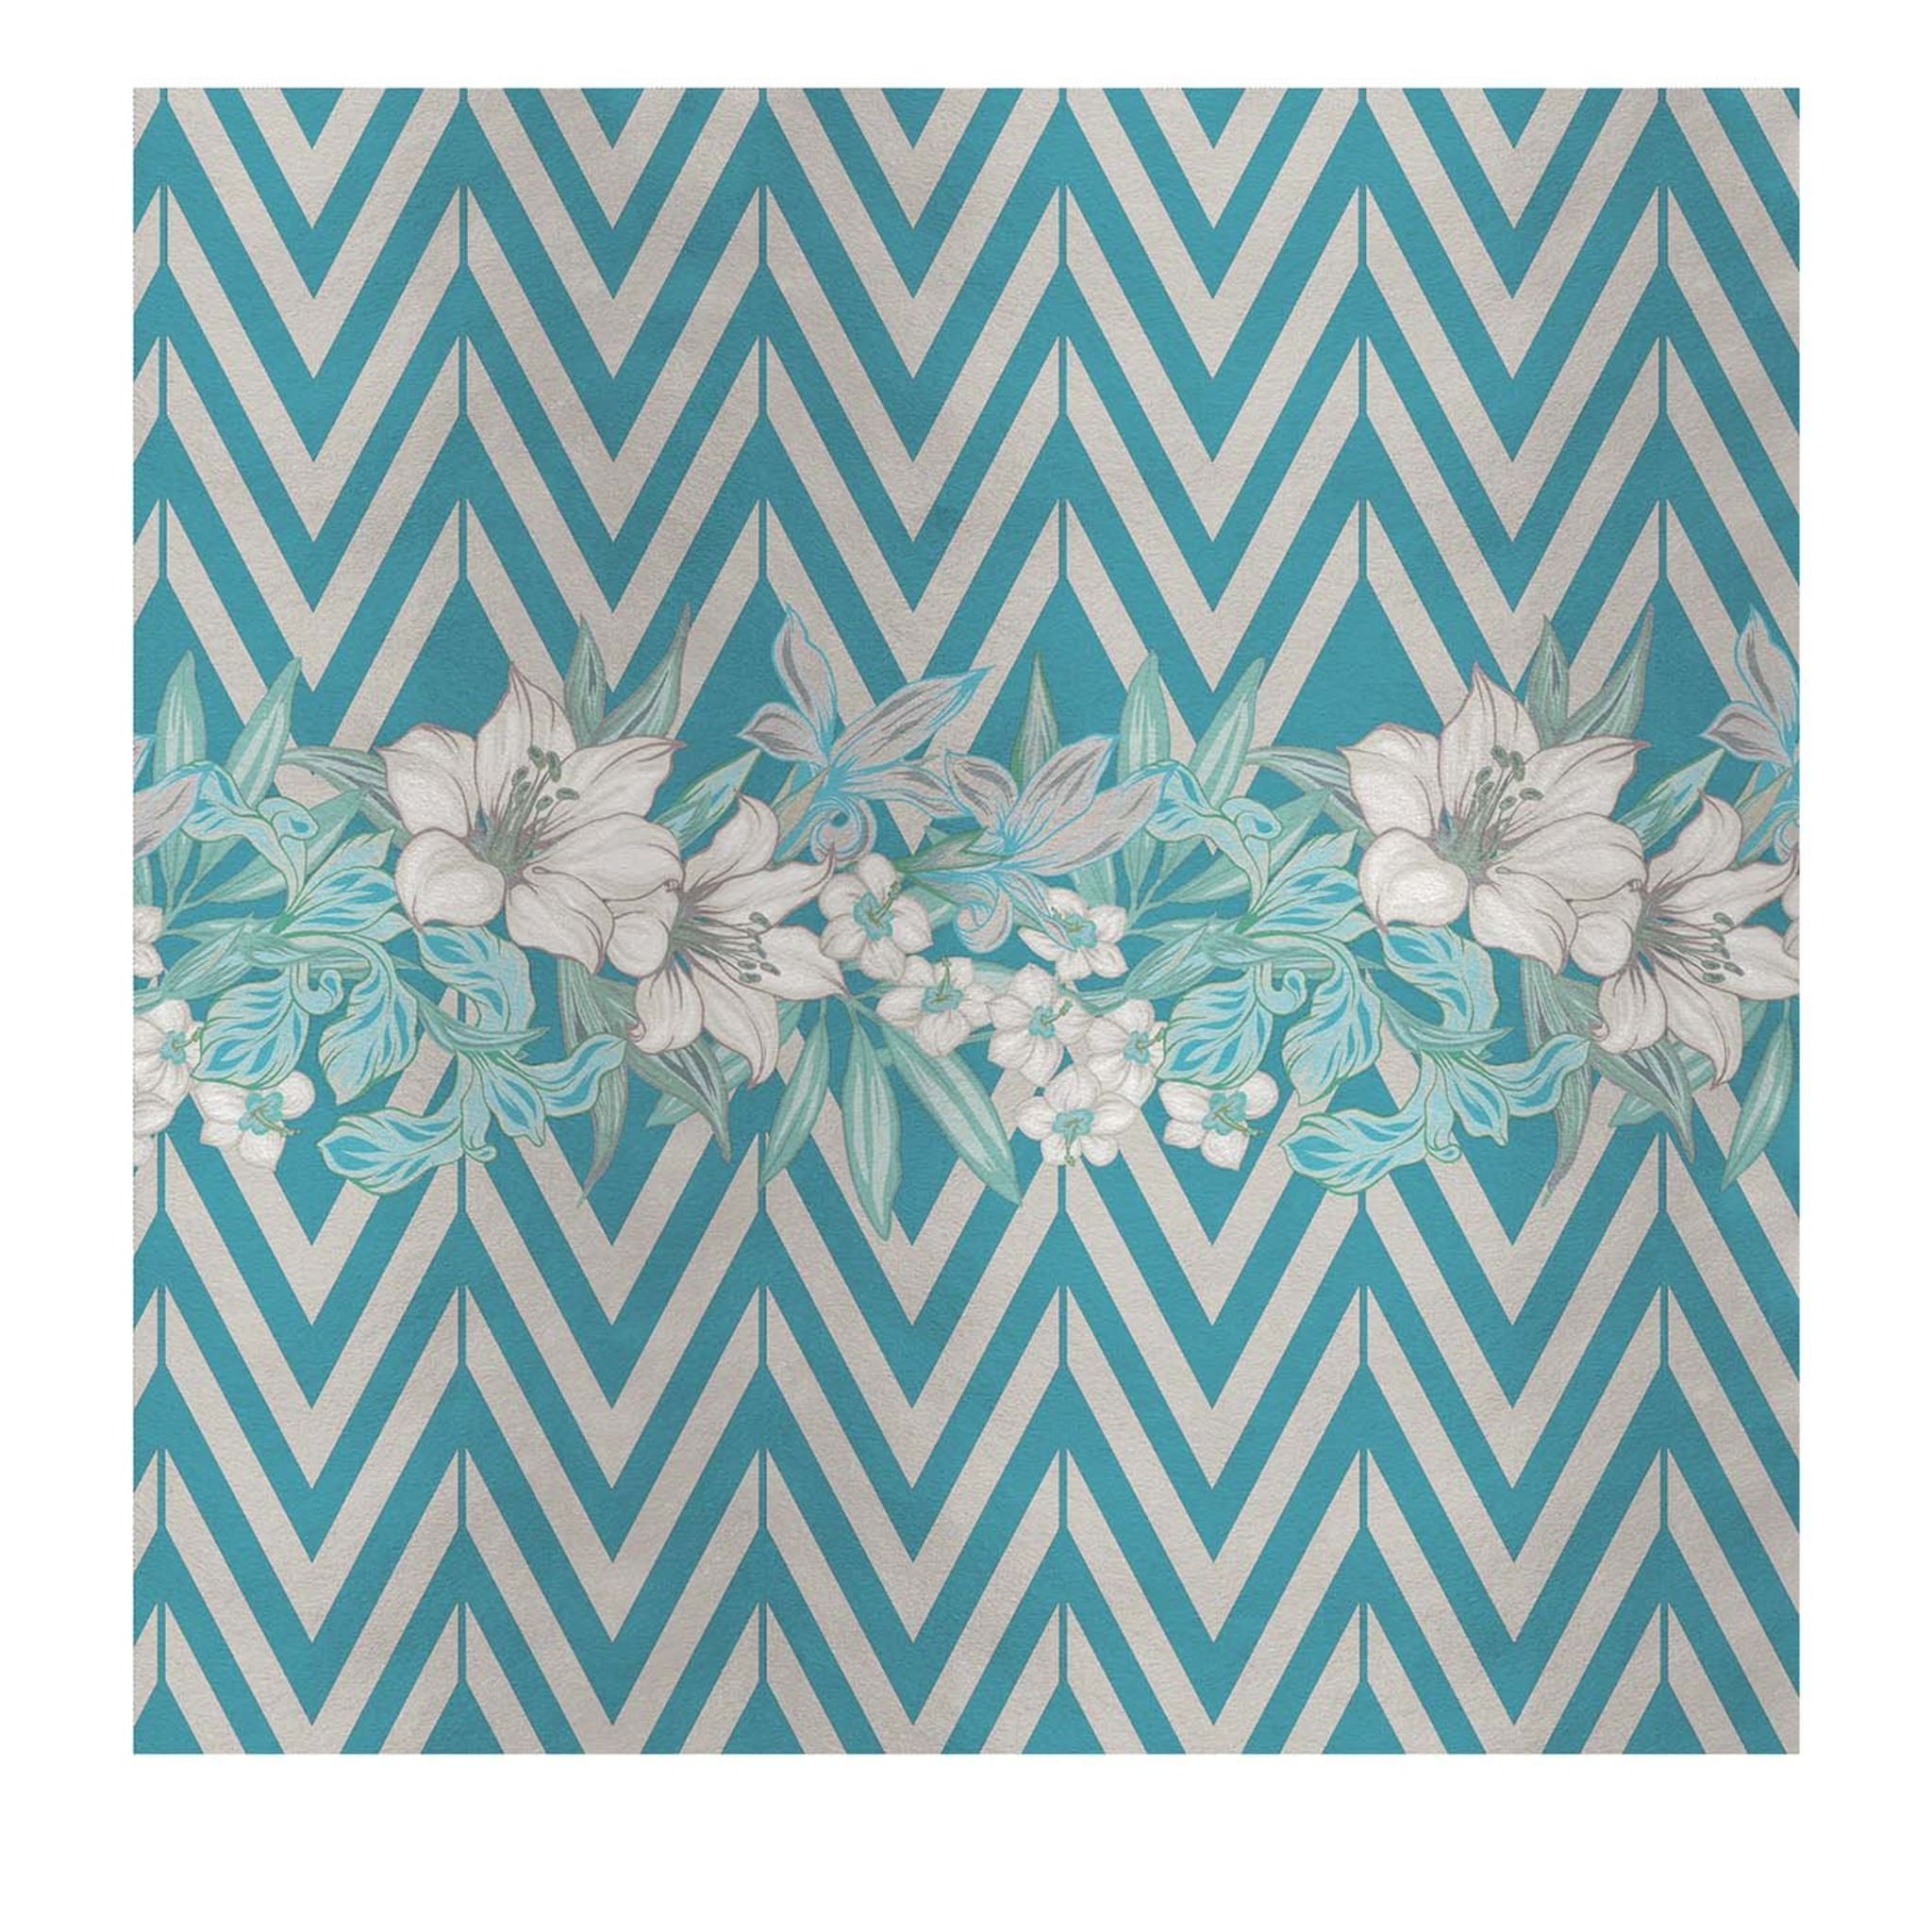 Flowers and Chevron Pattern Light Blue Panel - Main view